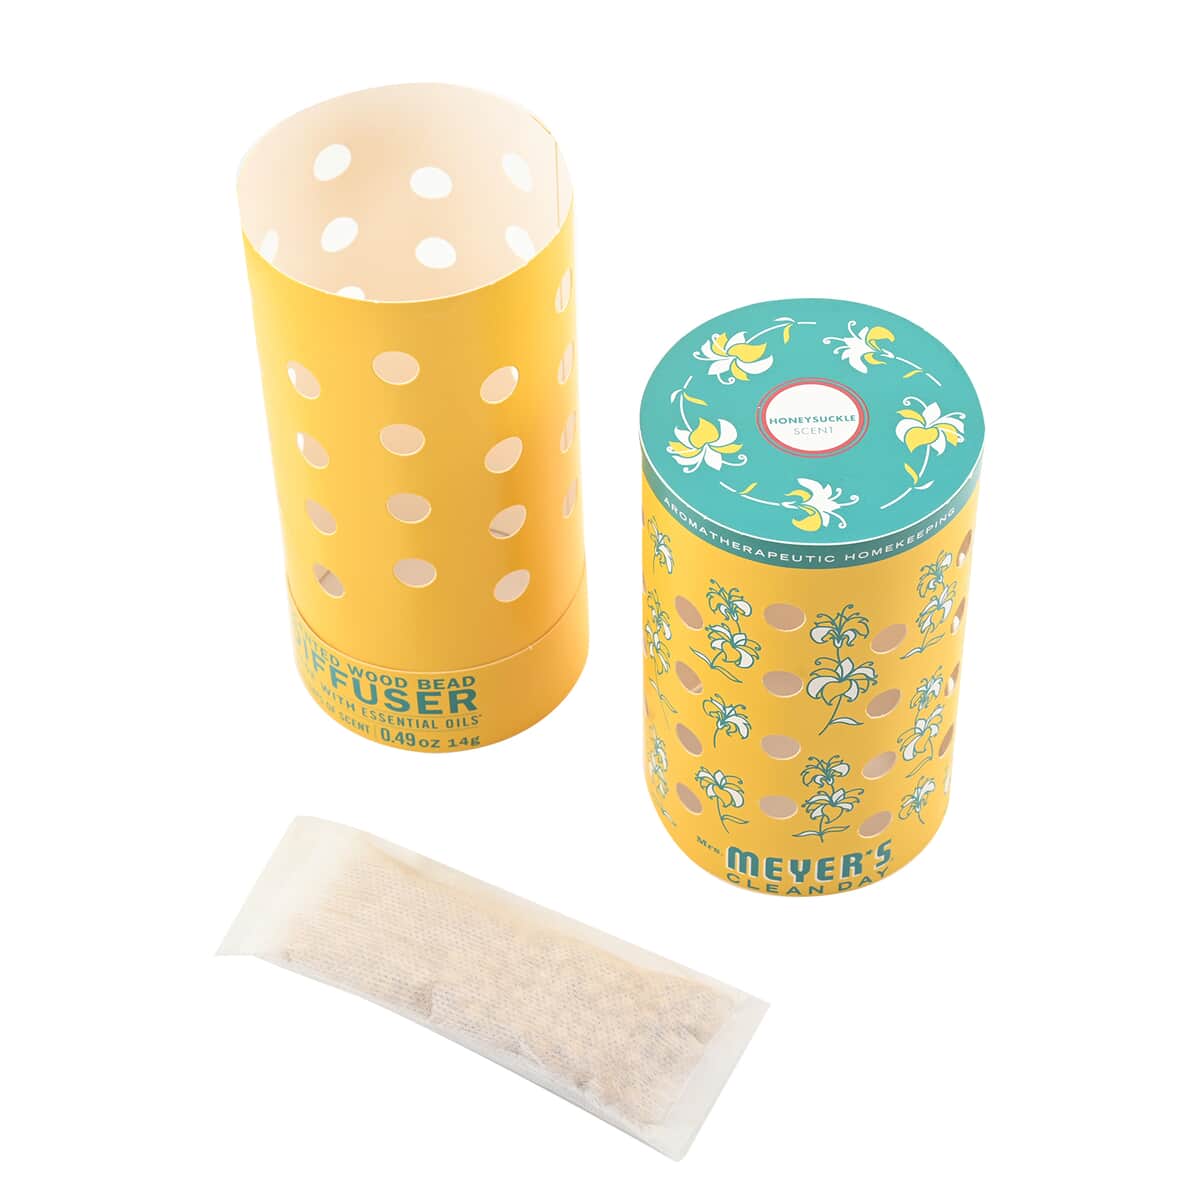 Mrs. Meyer's Clean Day Scented Wood Bead Diffuser - Honeysuckle 0.49 oz image number 3